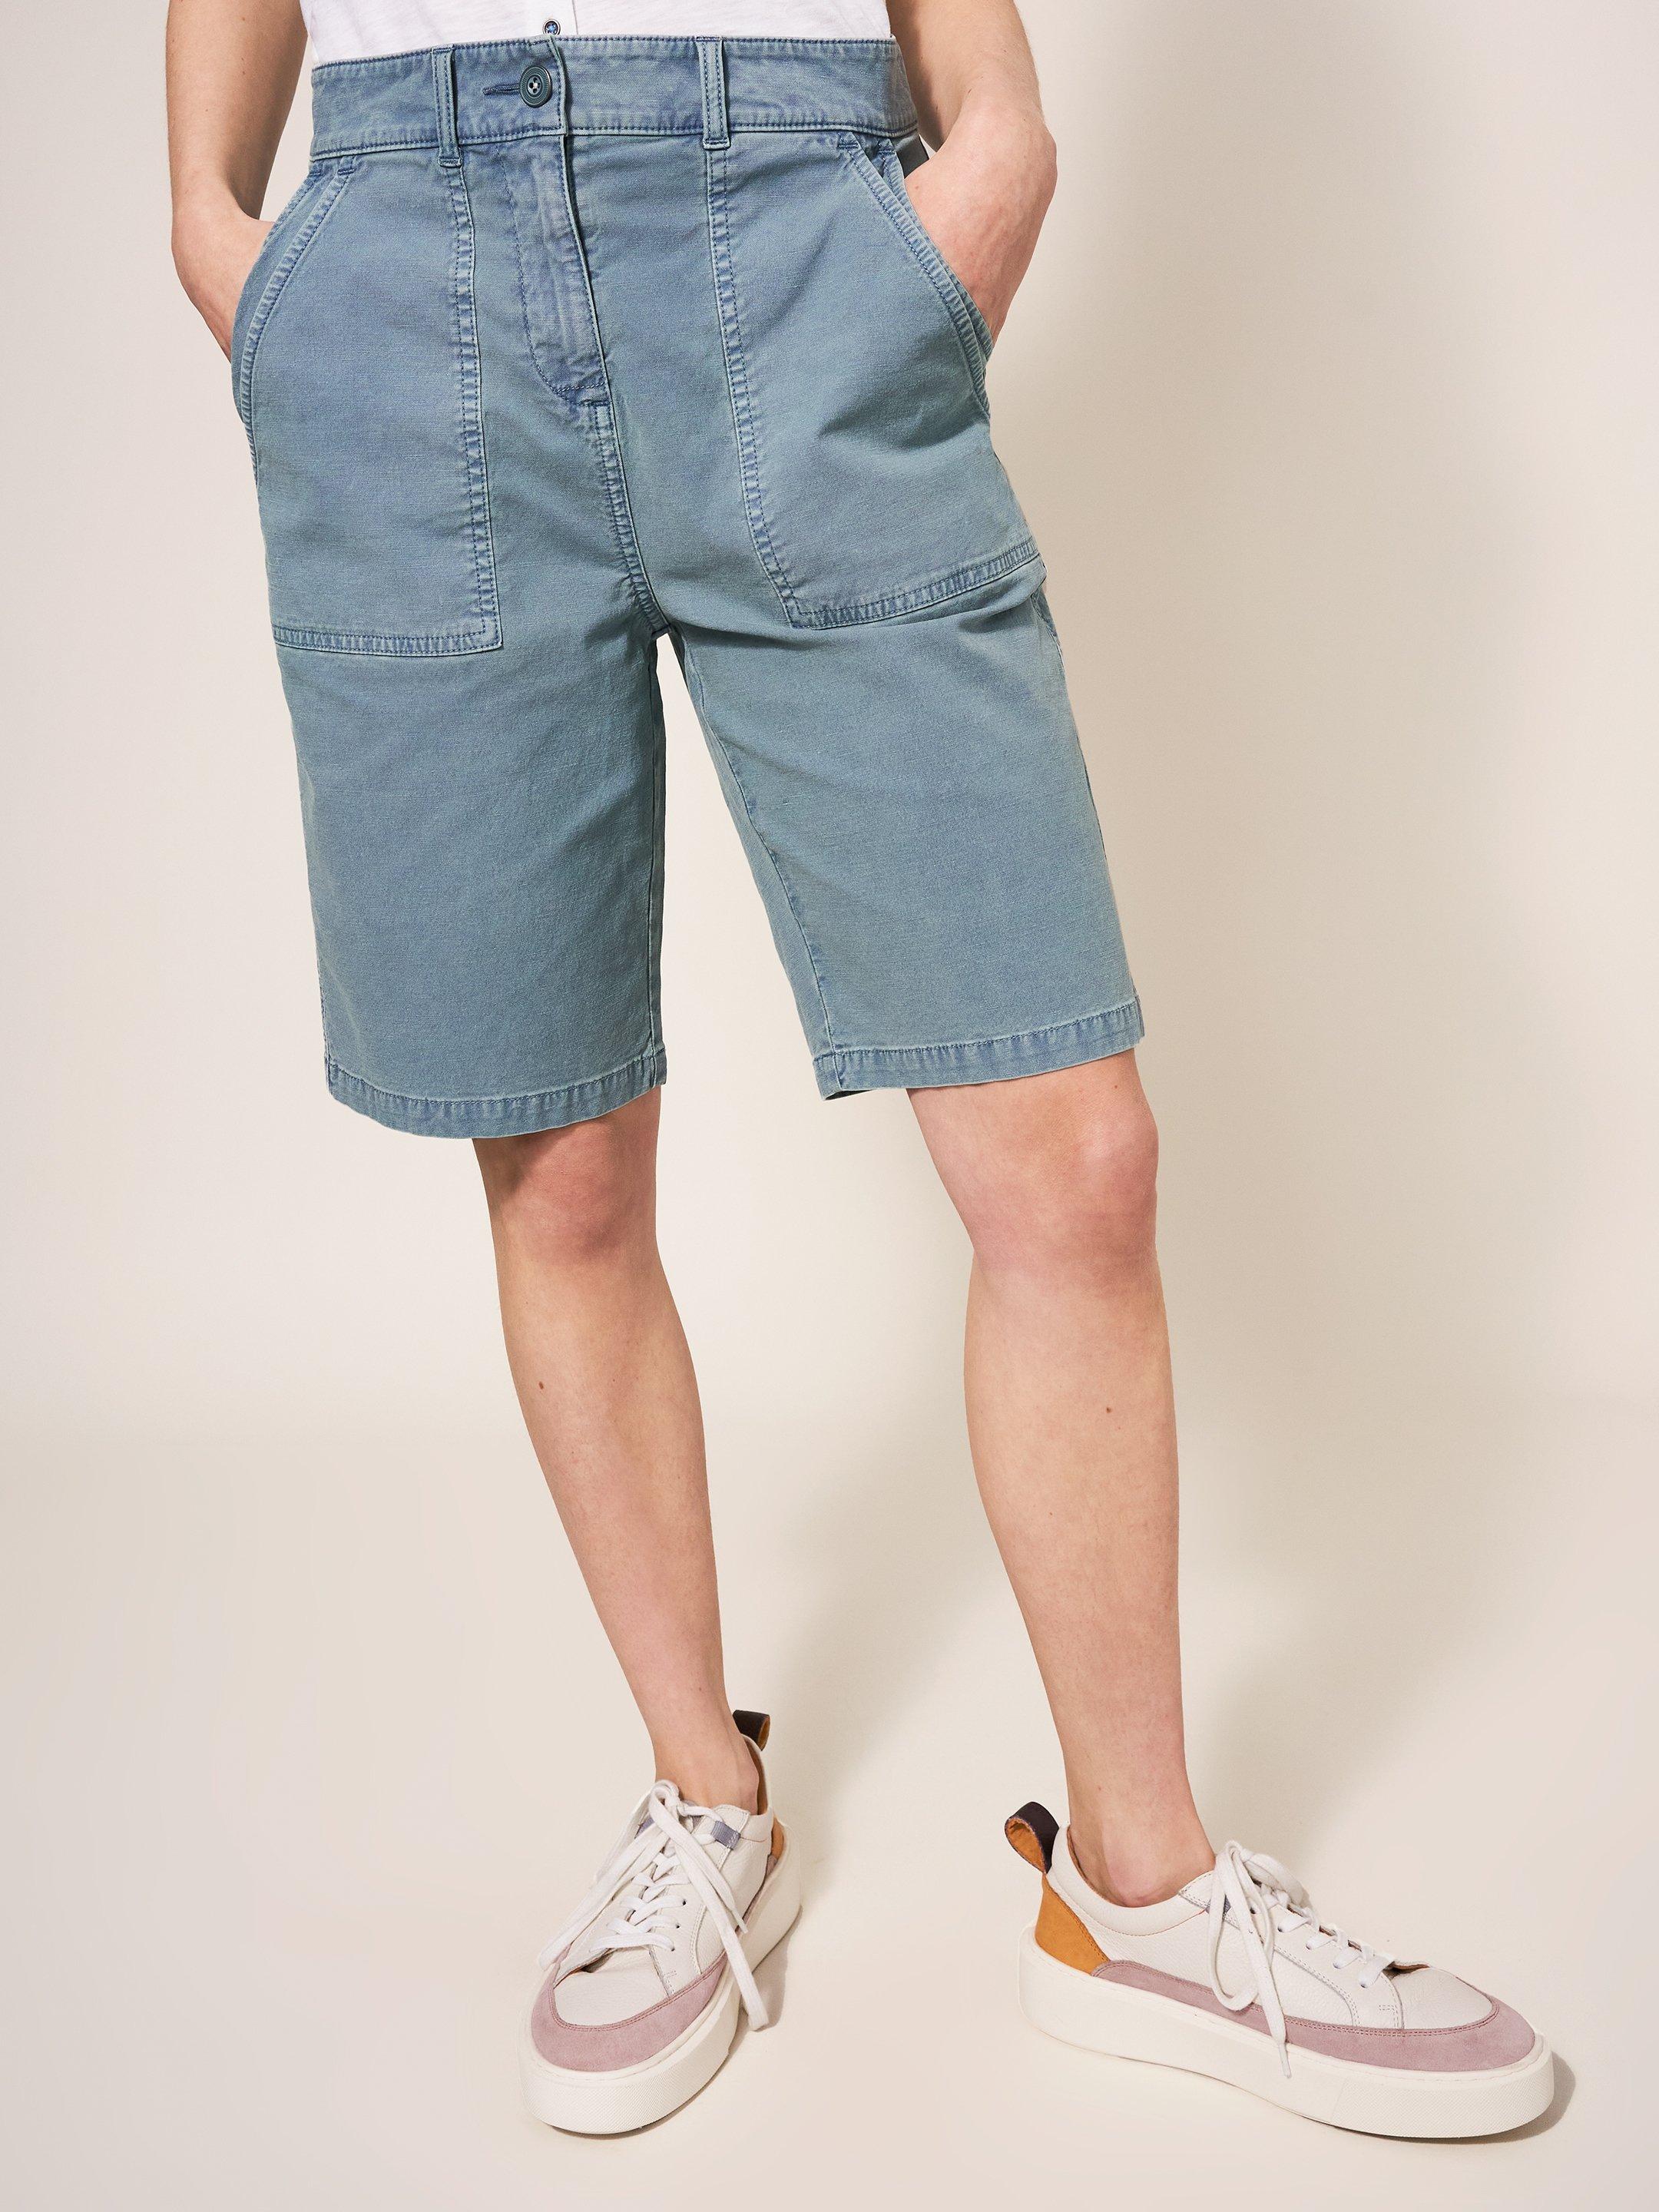 Twister Chino Short in MID TEAL - MODEL FRONT